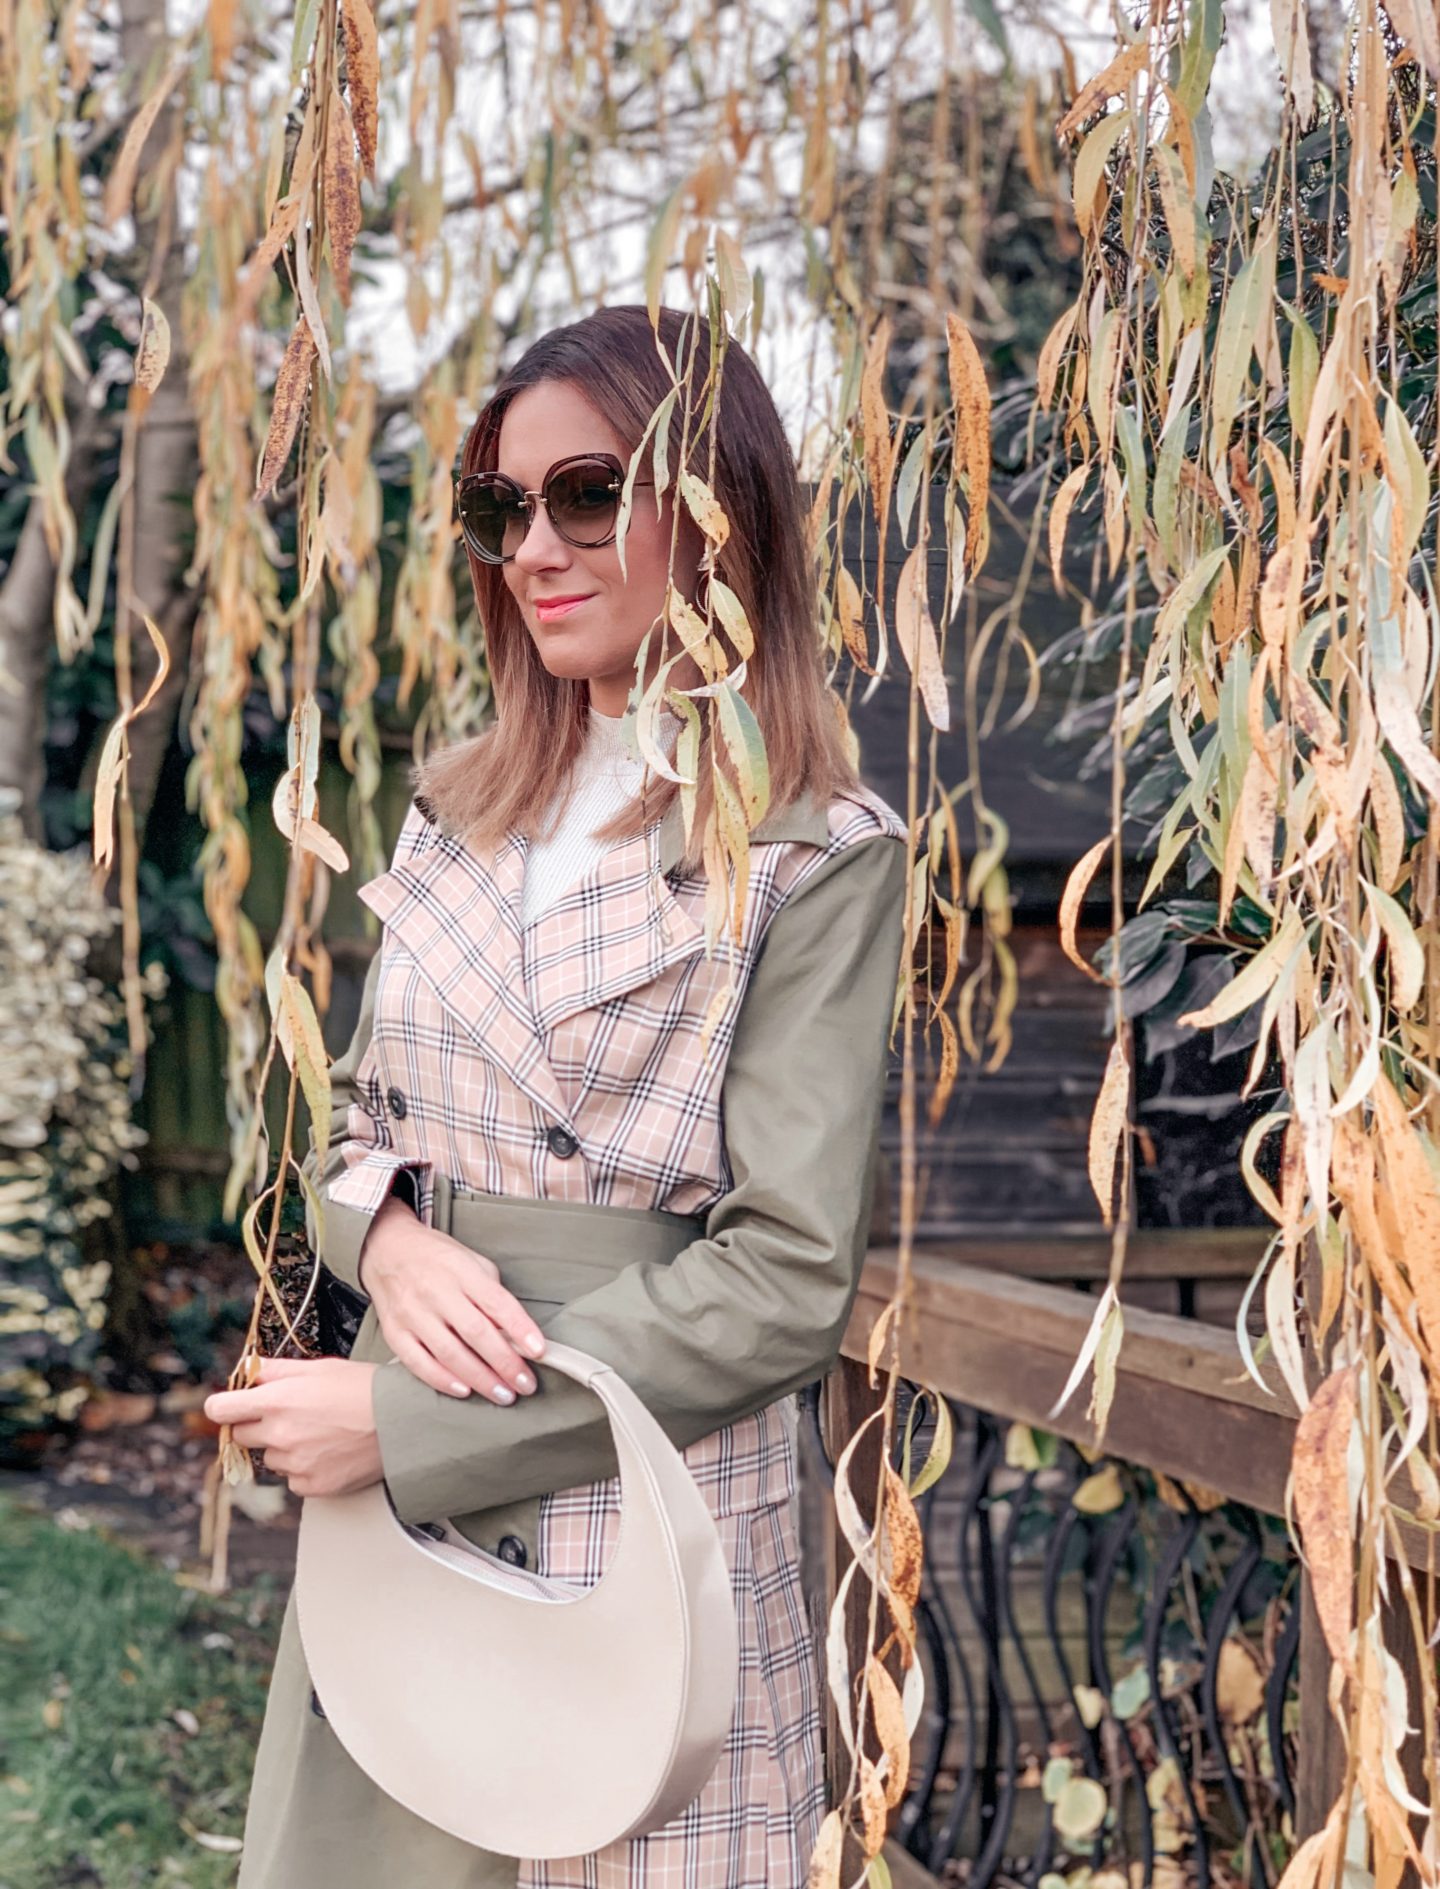 Unique21 mix& match trench in khaki & check | ASOS DESIGN Citrus high-heeled knee boots in khaki and tan mix | ASOS DESIGN smooth curved shoulder bag in beige | Miu Miu sunglasses